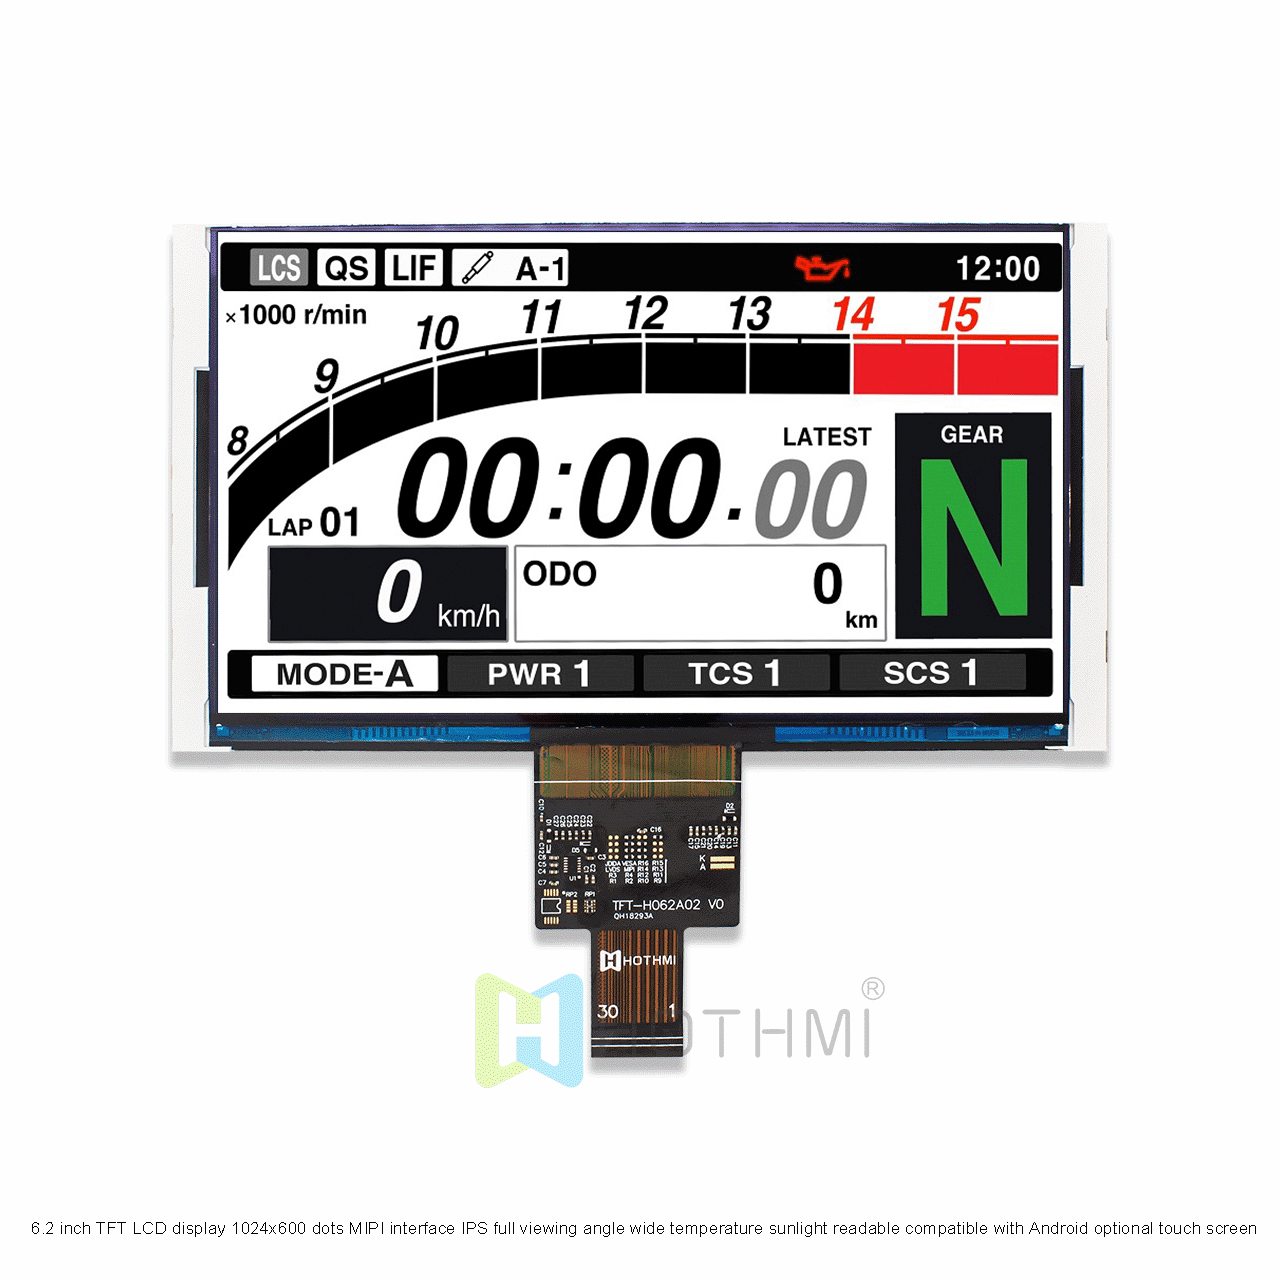 6.2 inch TFT LCD display 1024x600 dots MIPI interface IPS full viewing angle wide temperature sunlight readable compatible with Android optional touch screen